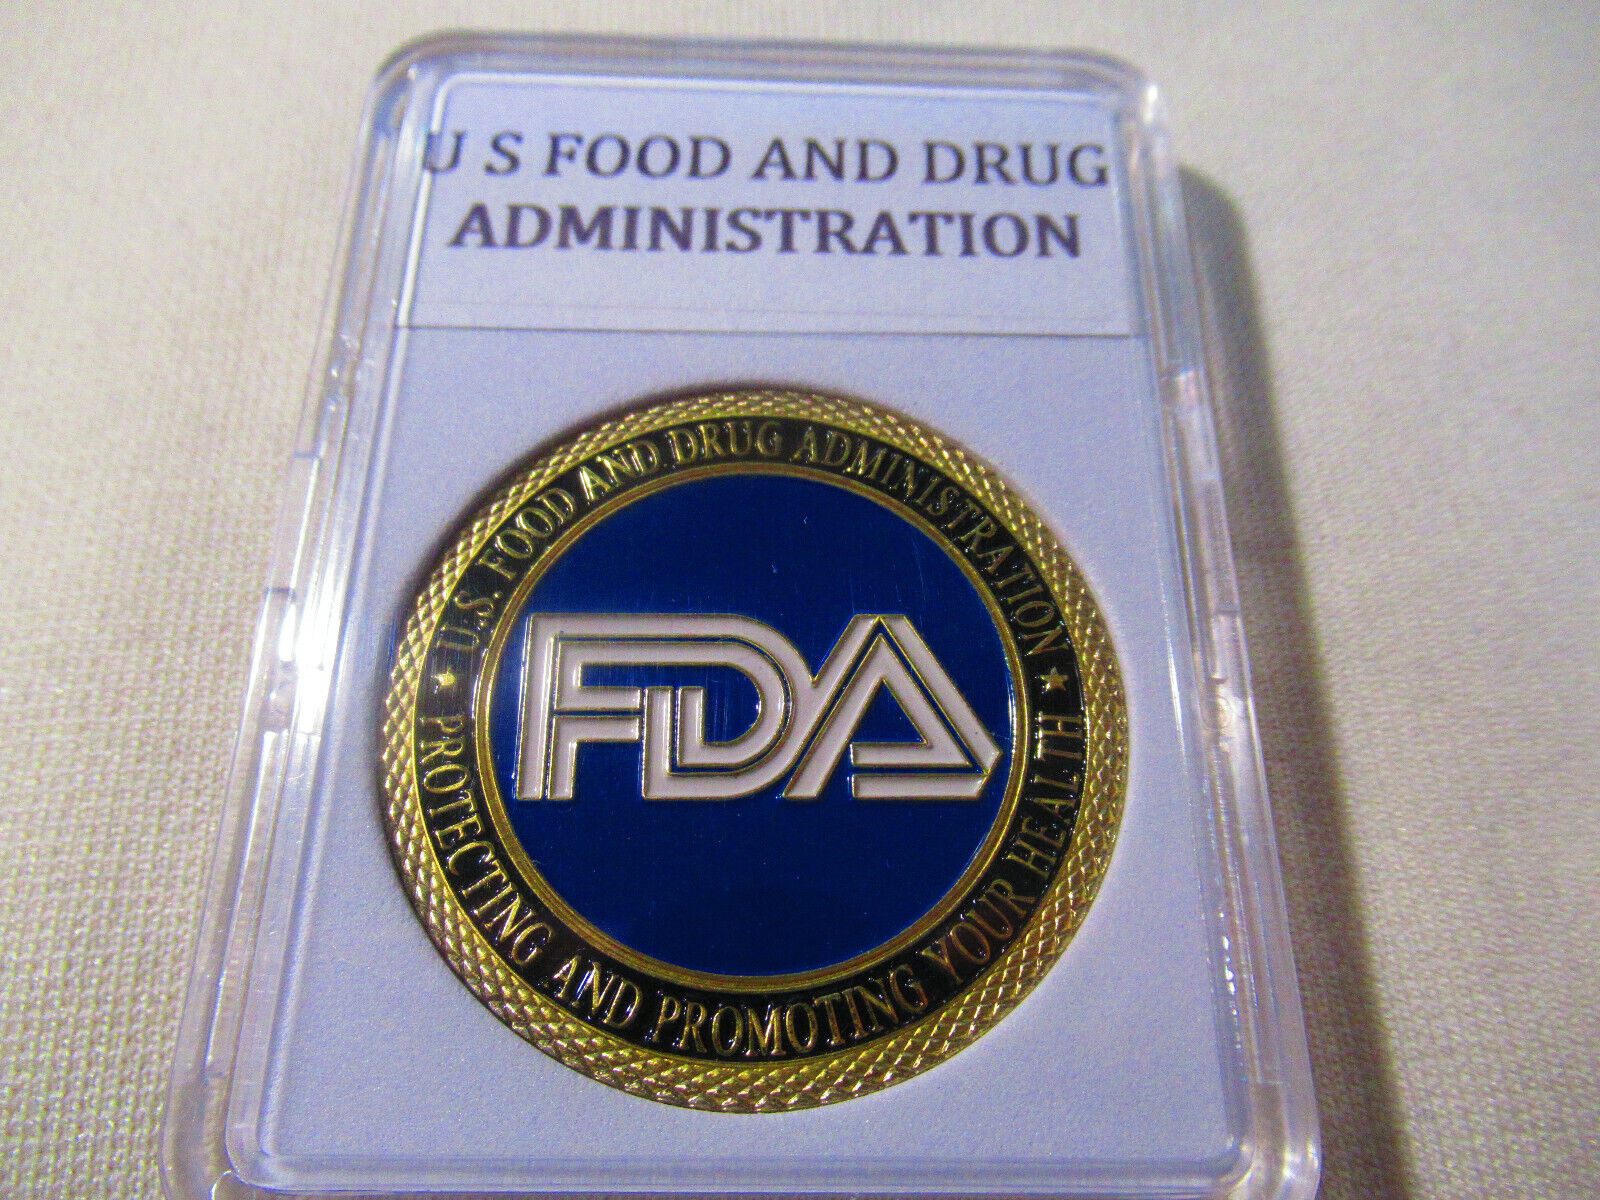 FOOD AND DRUG ADMINISTRATION (FDA) Challenge Coin 